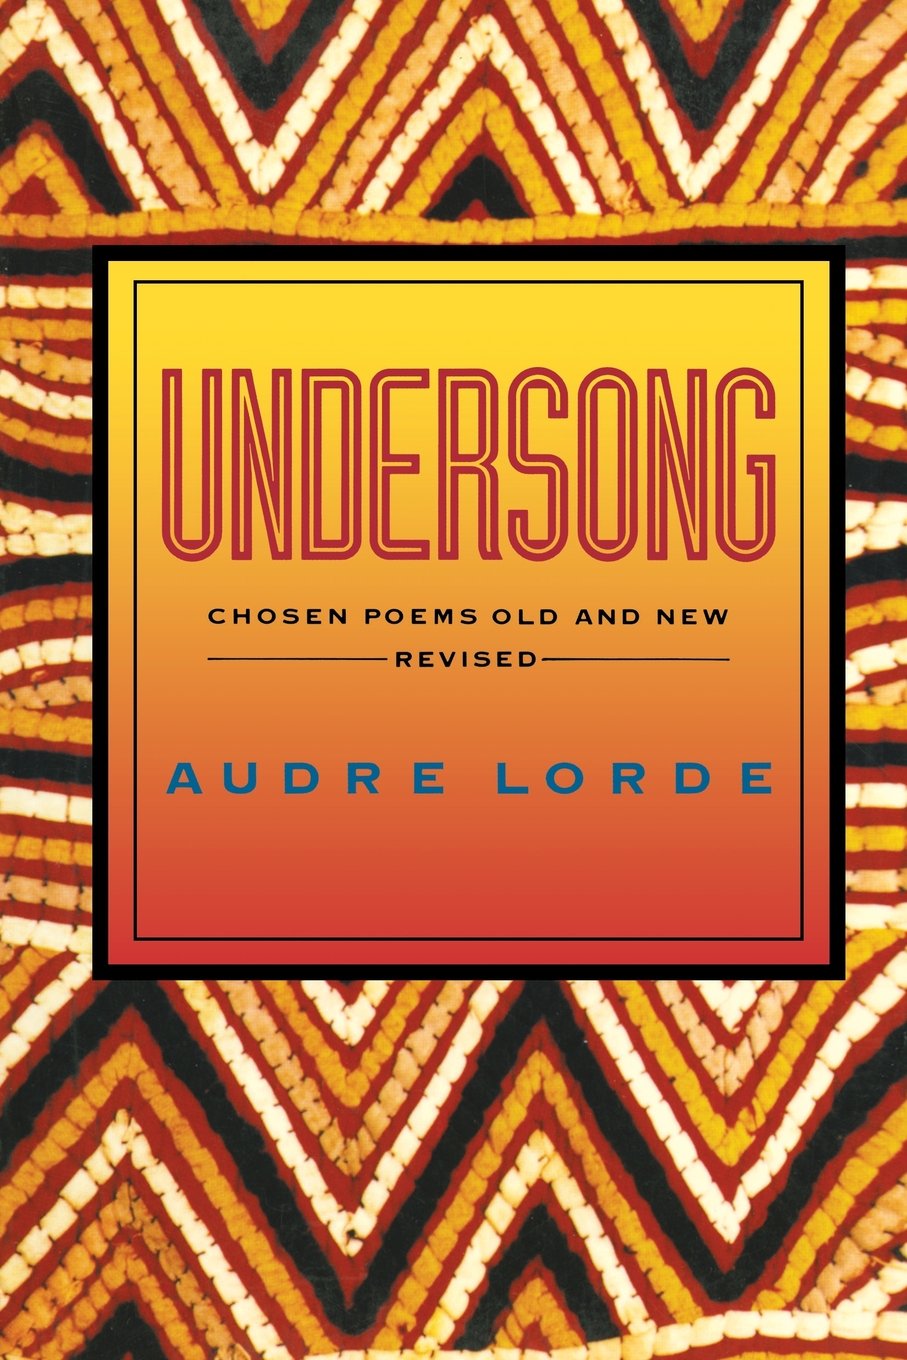 Undersong: Chosen Poems Old and New by Audre Lorde